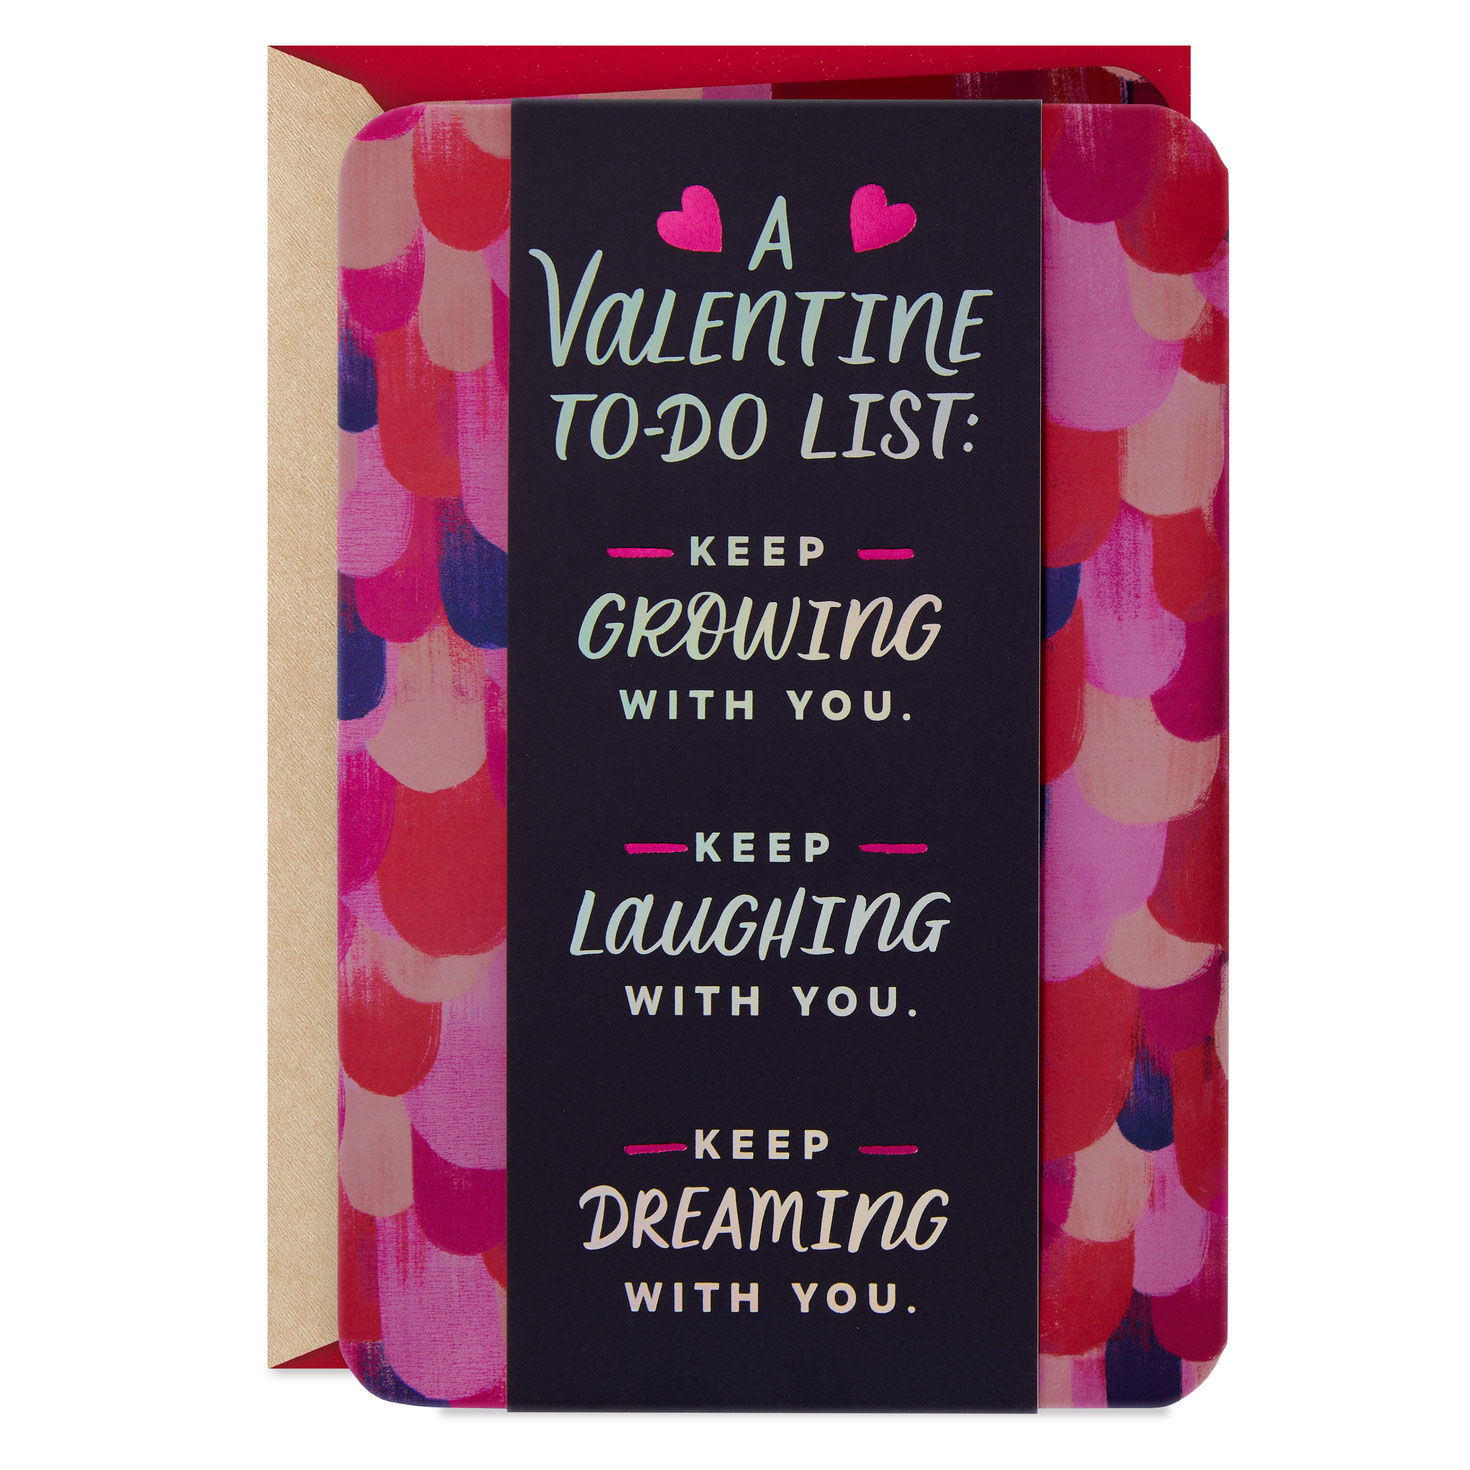 Valentine To-Do List Romantic Valentine's Day Card for Her for only USD 6.99 | Hallmark